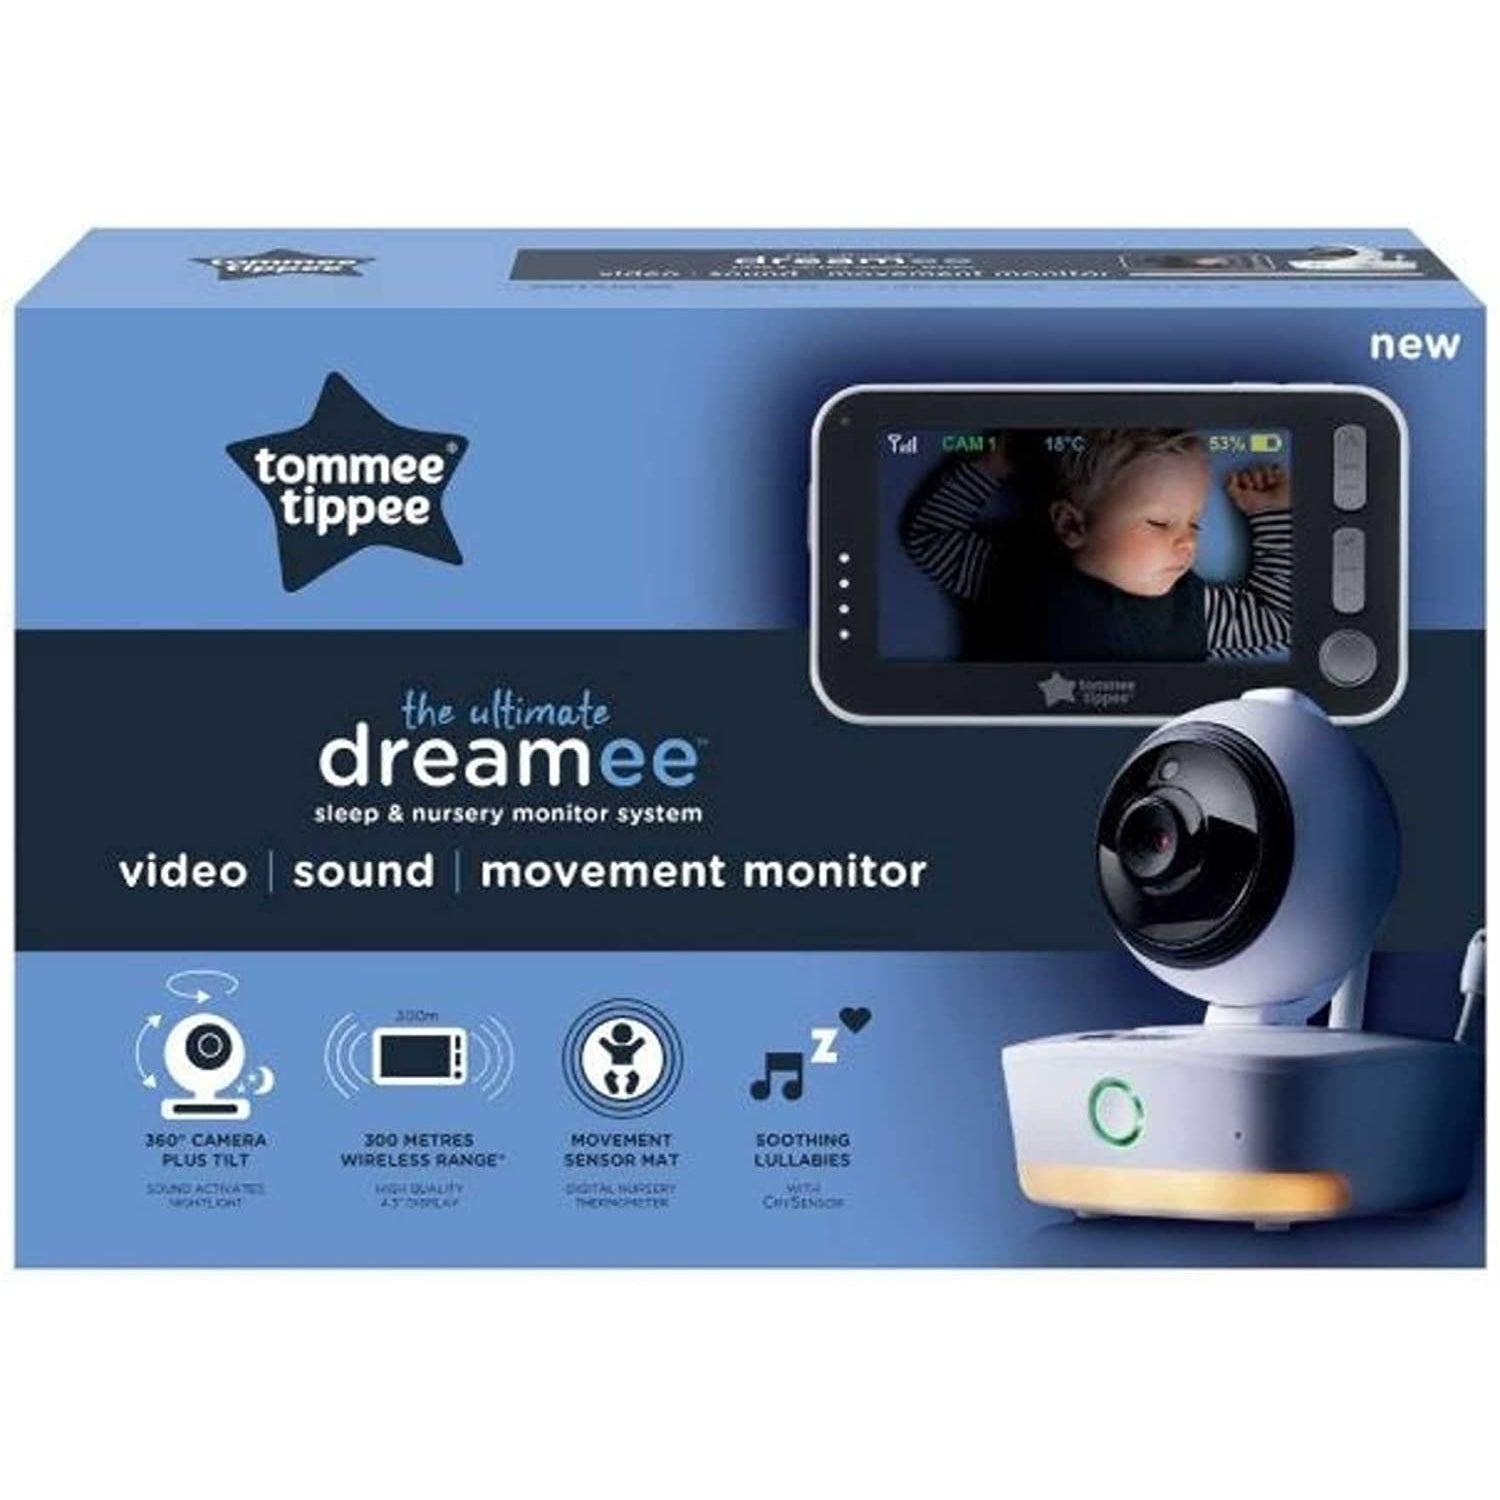 Tommee Tippee The Ultimate Dreamee Sleep & Nursery Monitor System - Refurbished Excellent